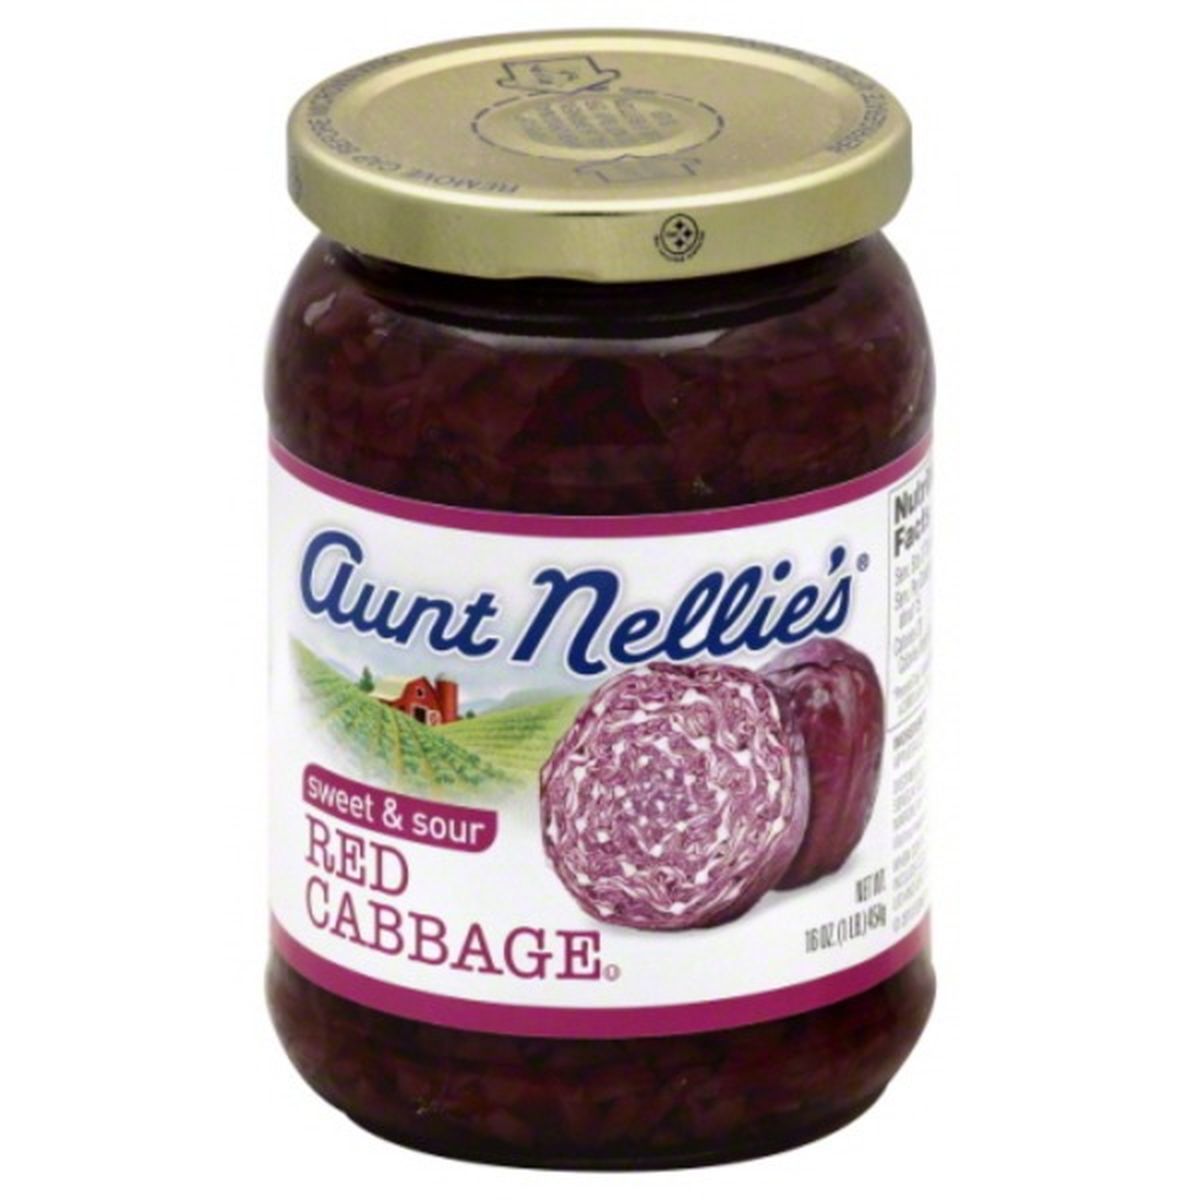 Calories in Aunt Nellie's Cabbage, Red, Sweet & Sour